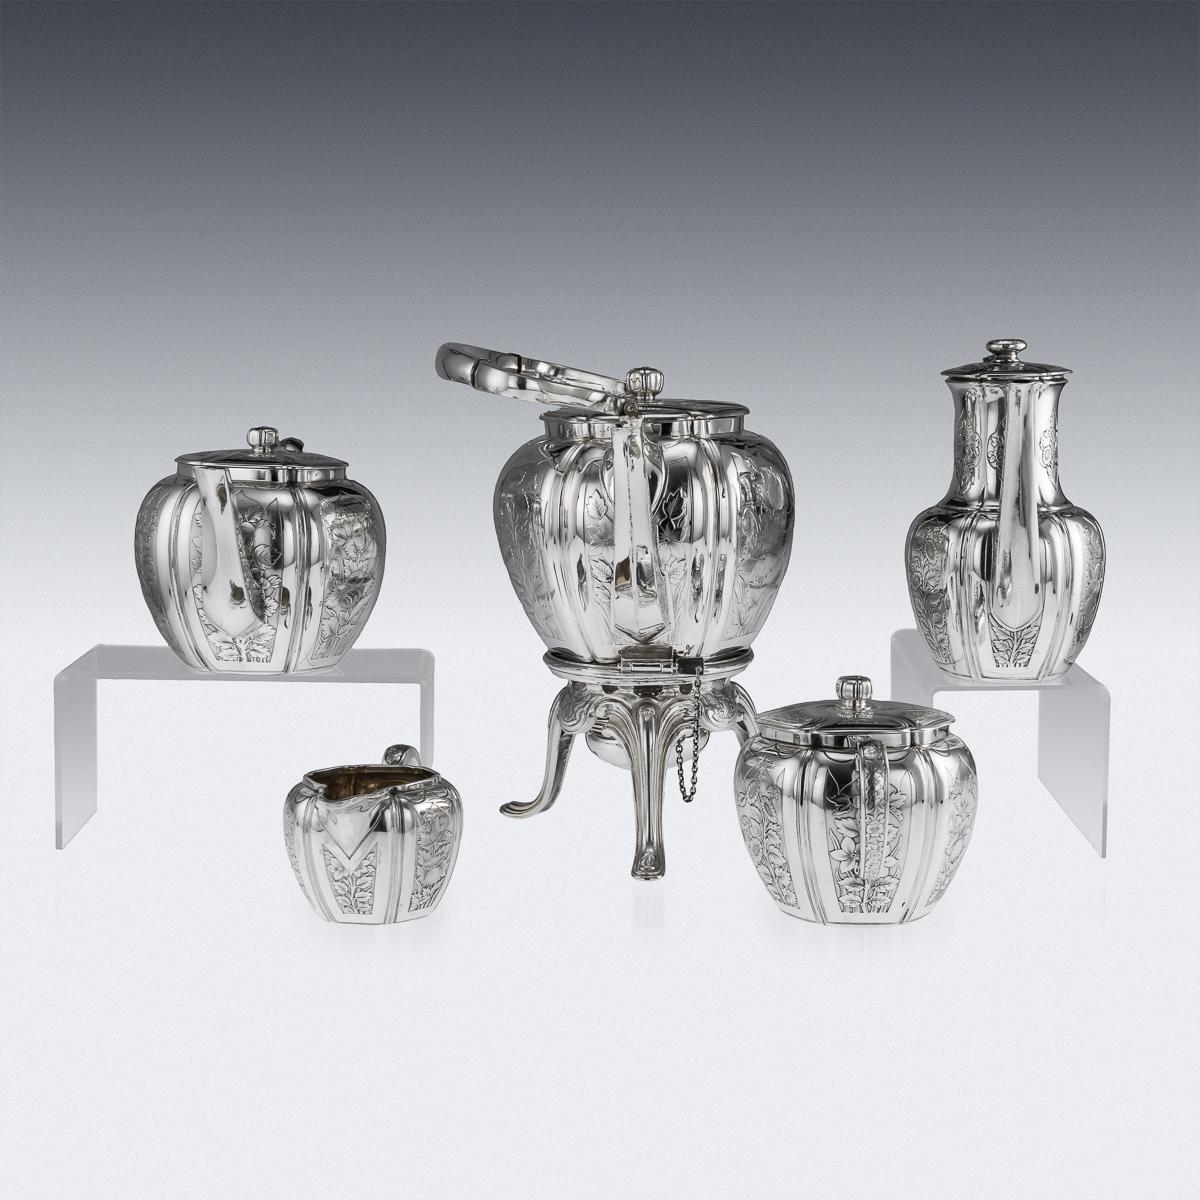 Antique 19th Century French Solid Silver Five Piece Tea Service Odiot circa 1880 For Sale 2